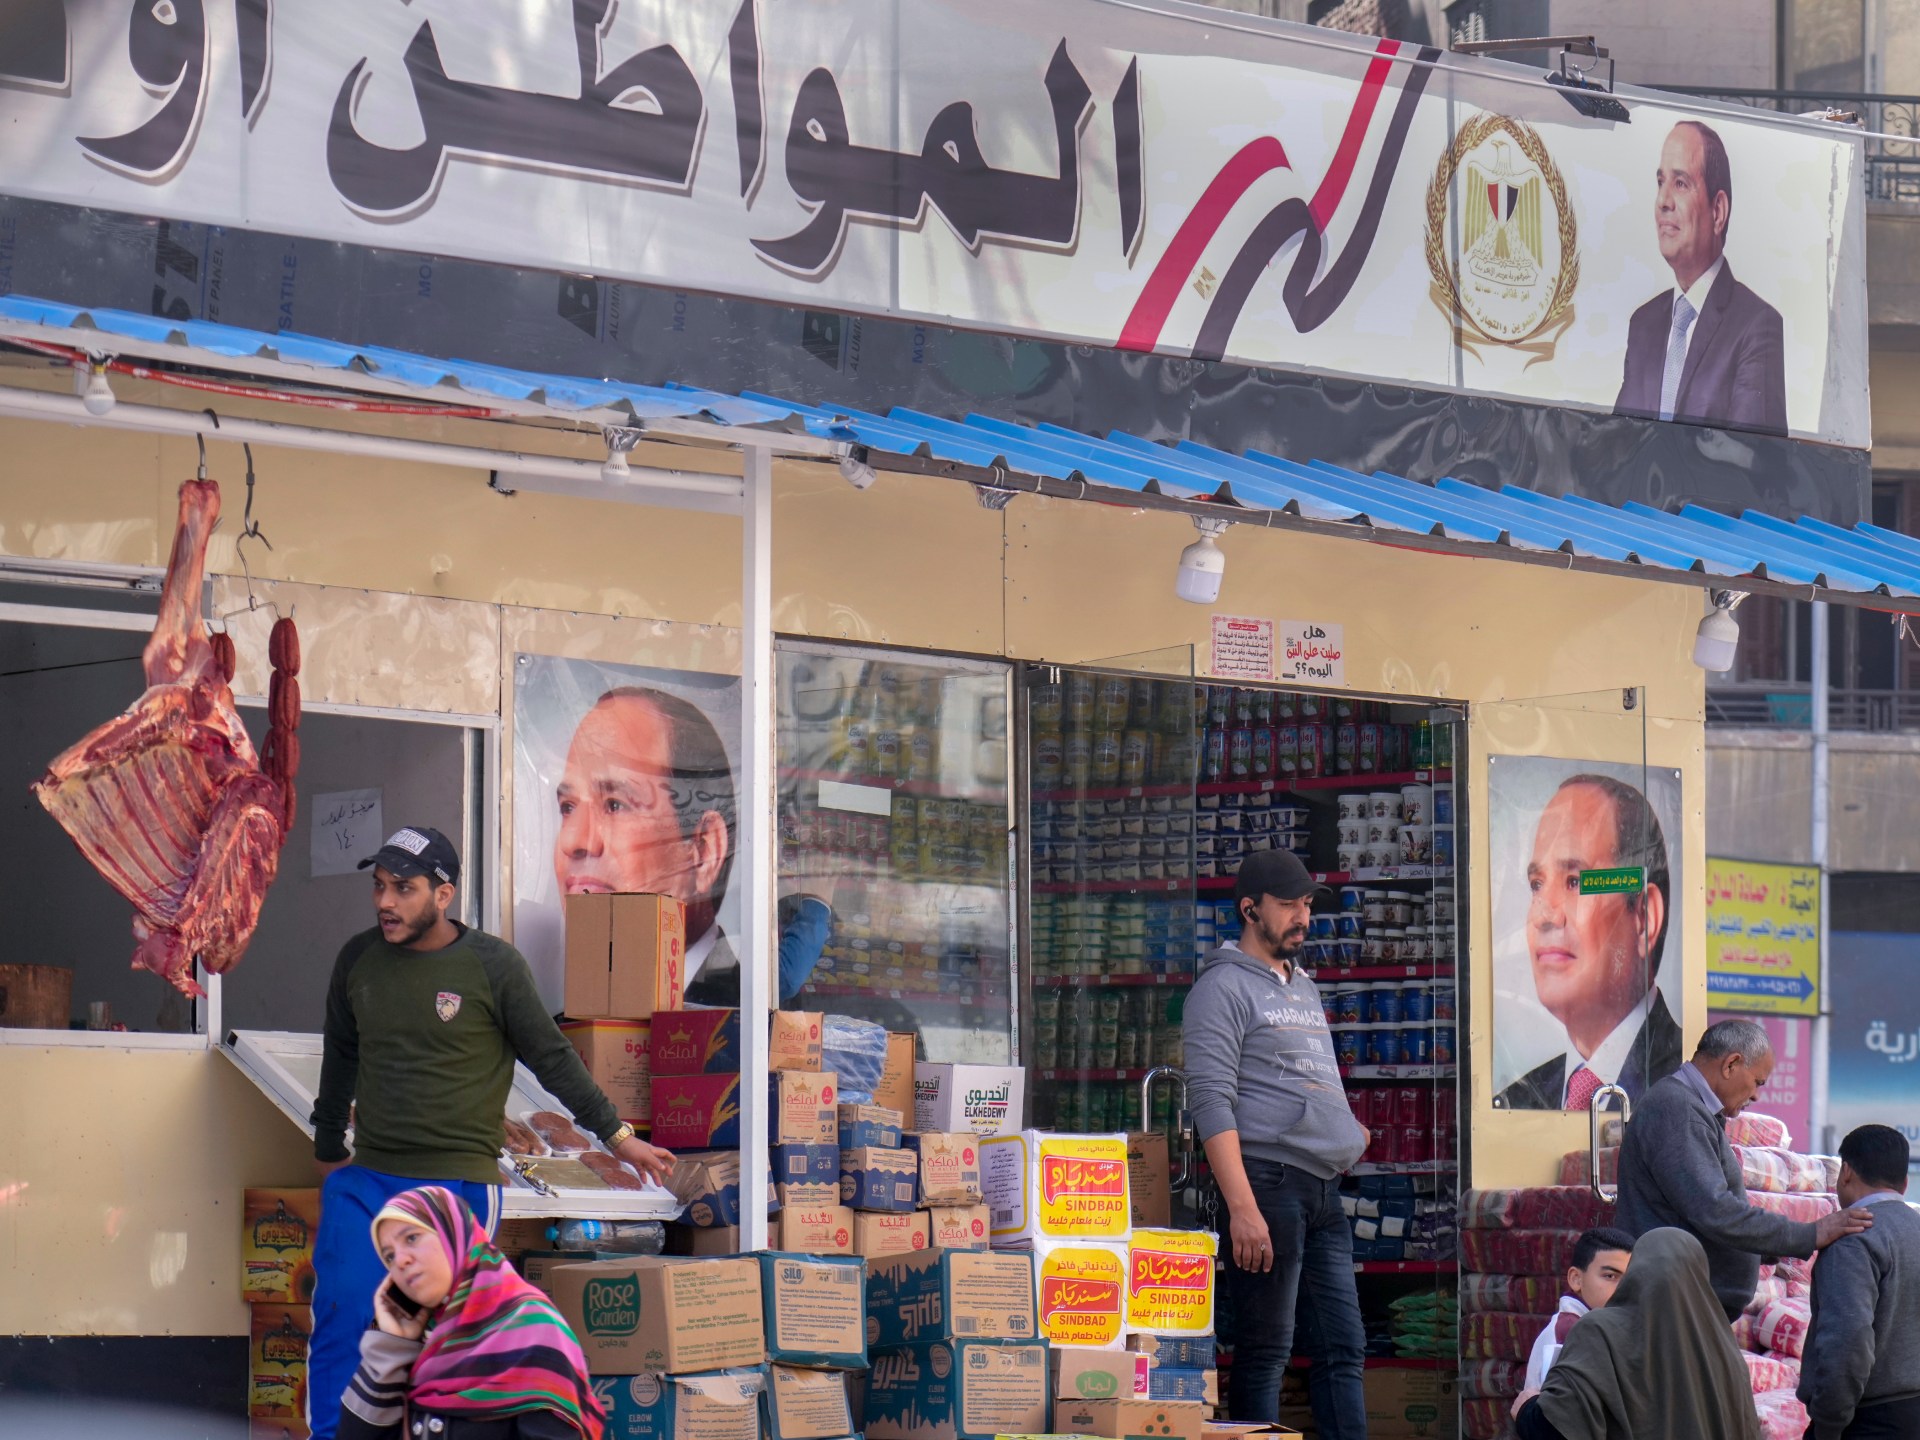 Top Egyptian opposition presidential prospect qualified by adware | Technology Information